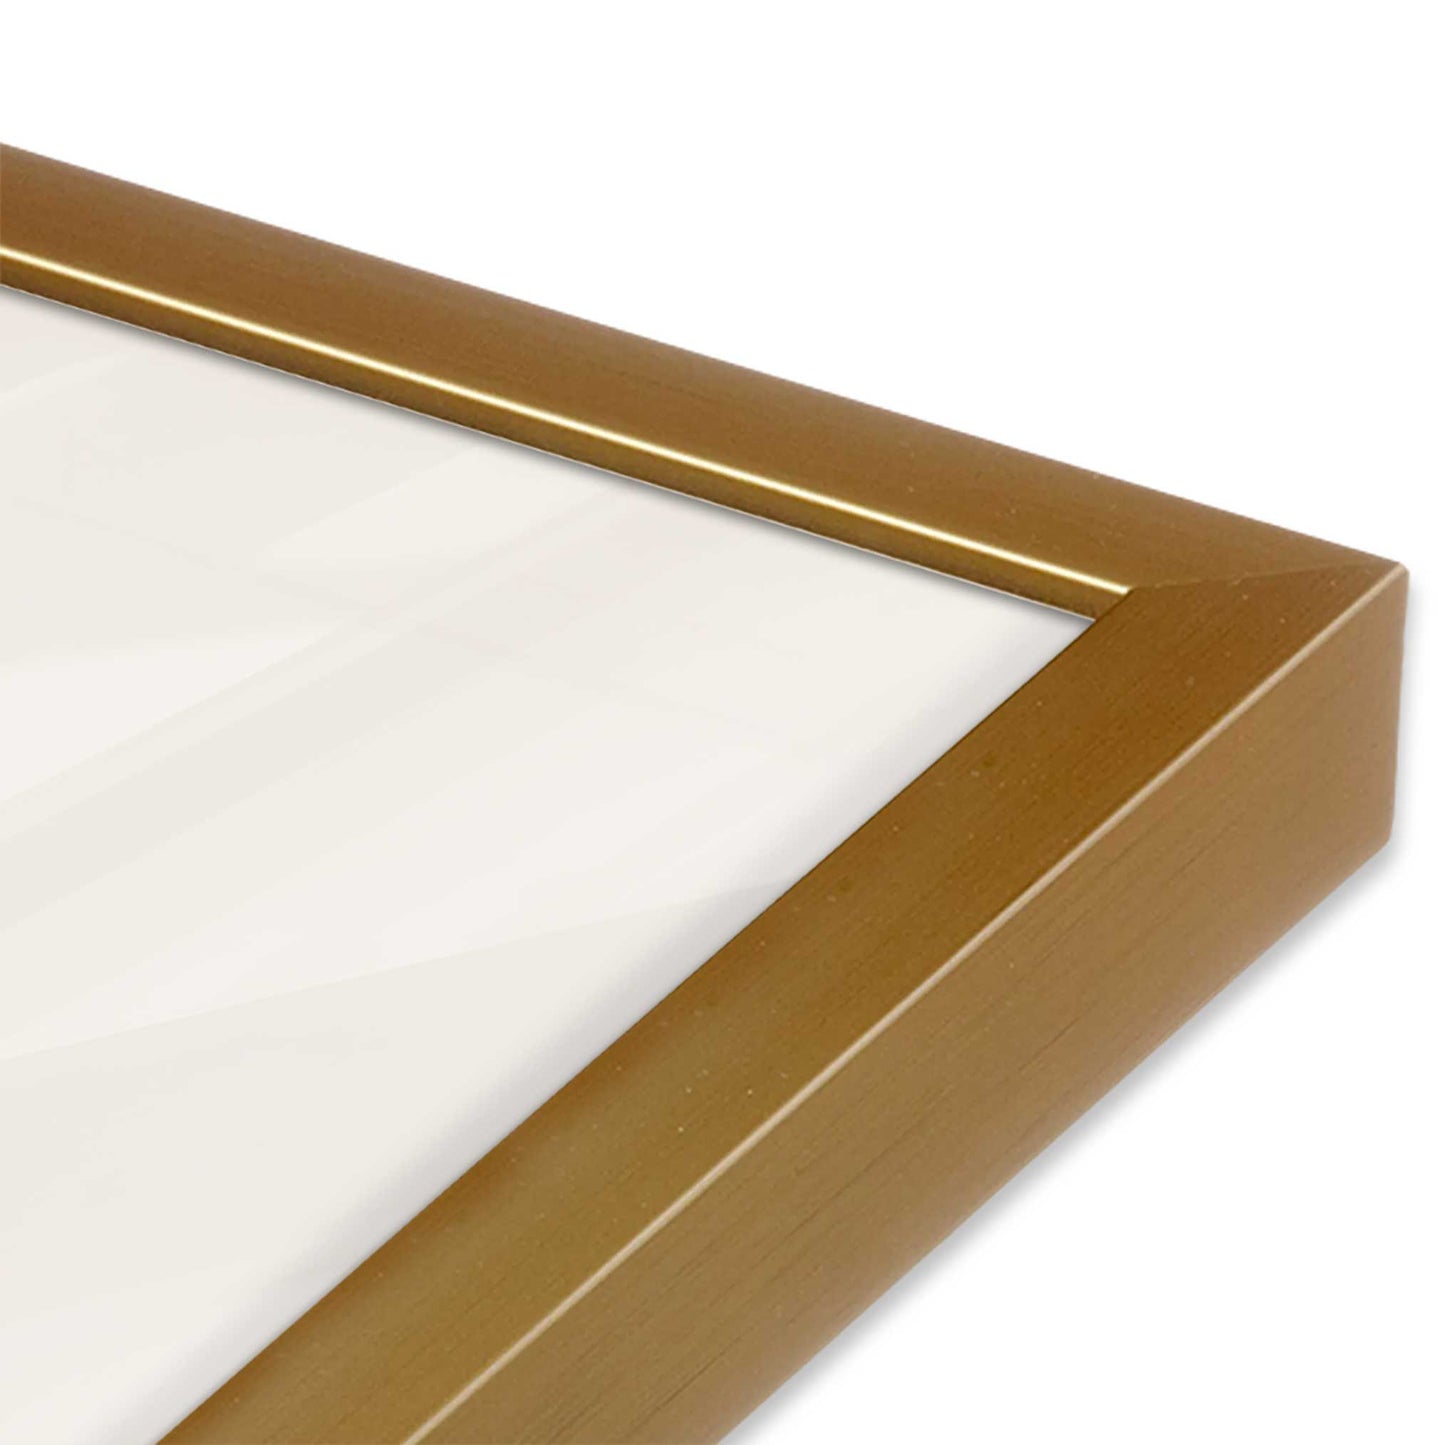 [Color:Polished Gold] Picture of art in a Polished Gold frame of the corner